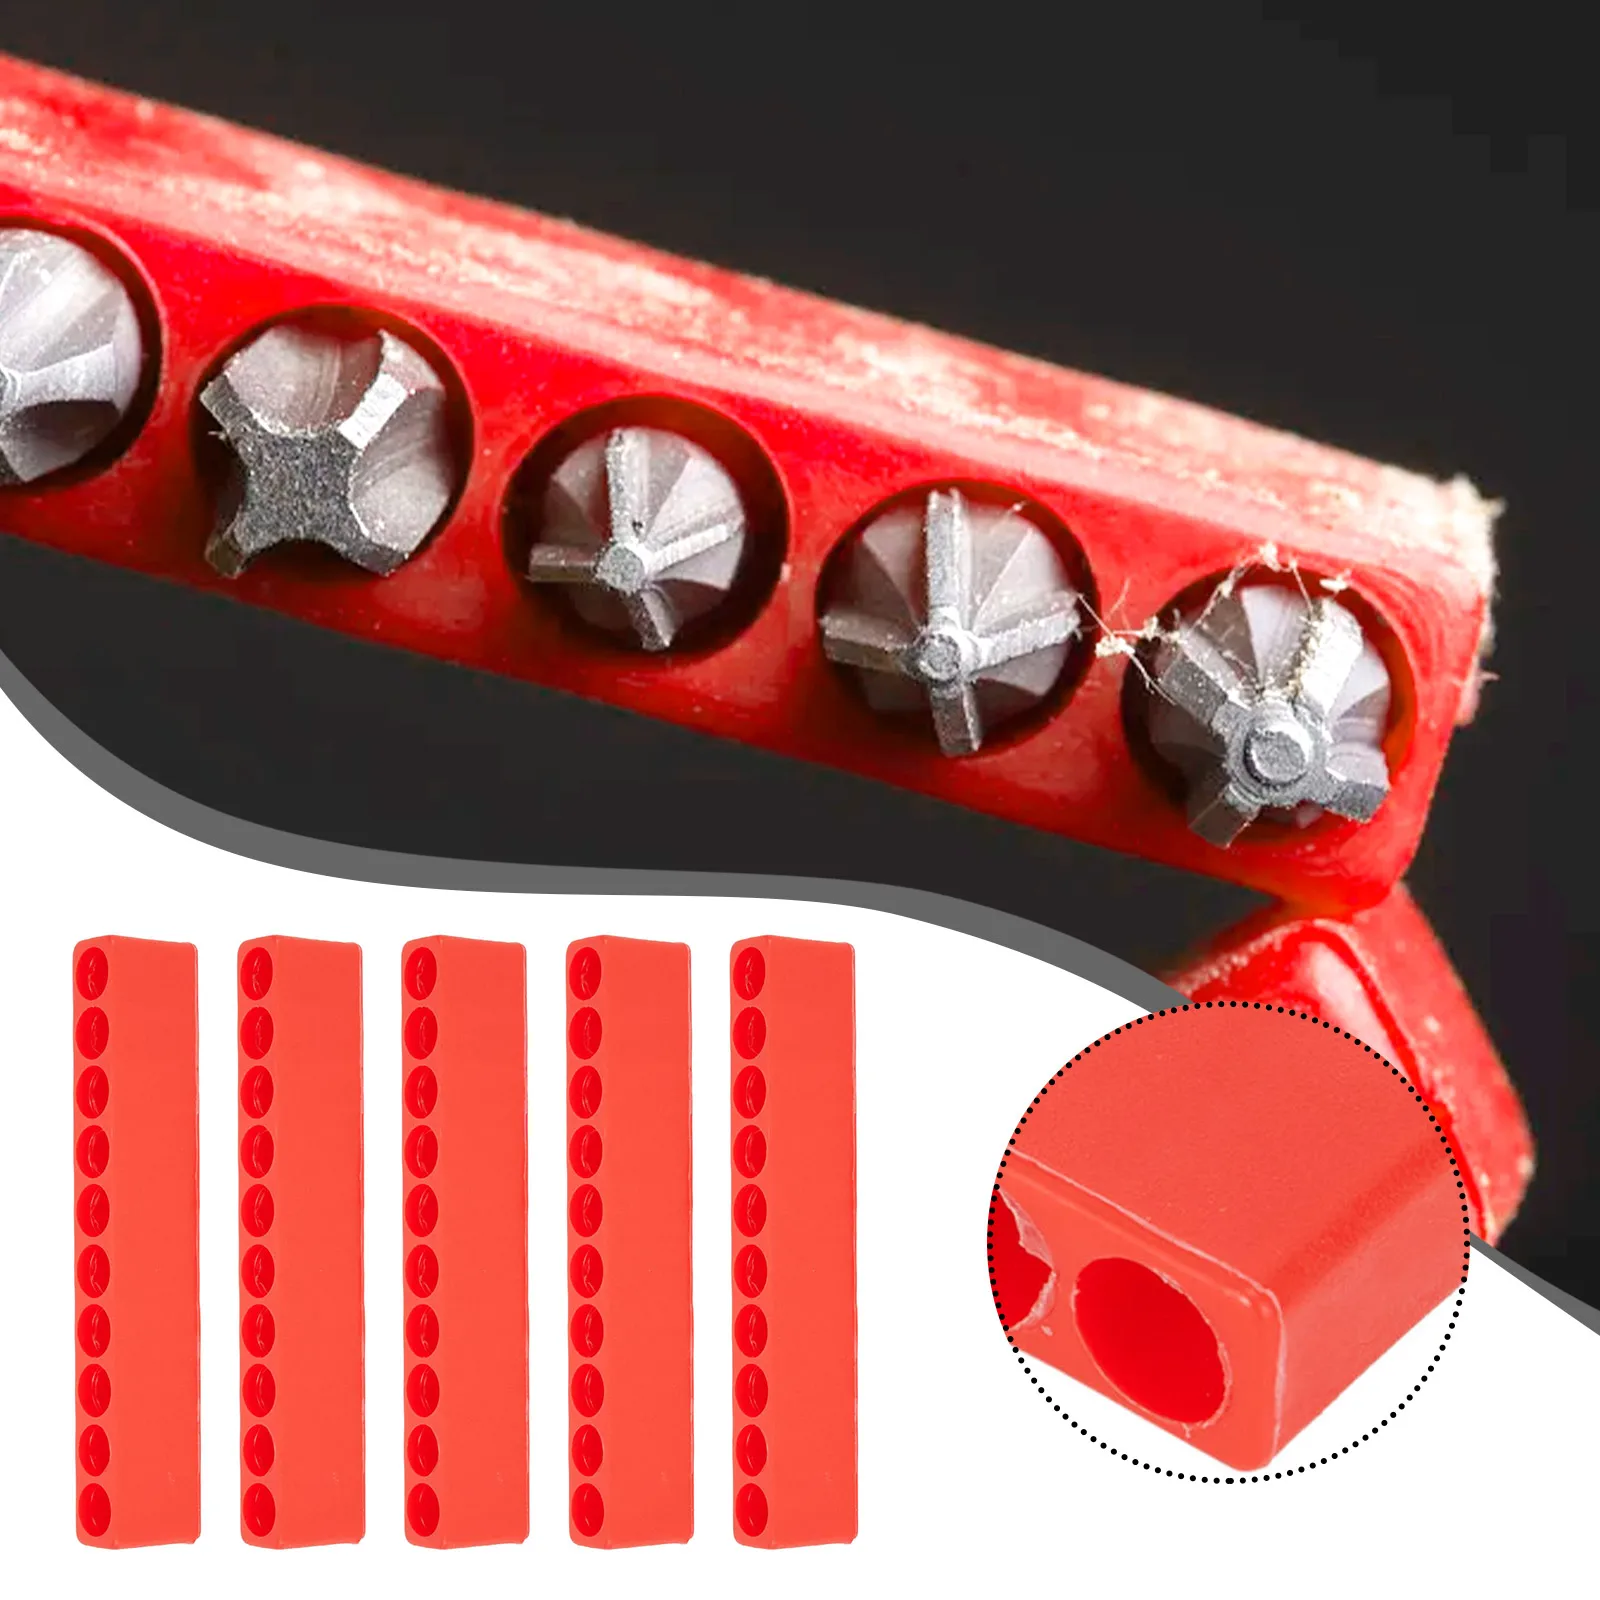 5PCS Screwdriver Bit Box Hand Tools Holder Bits Organizer Rack Durable Screw Storage 10 Holes Red Case For 1/4inch Hex Tools